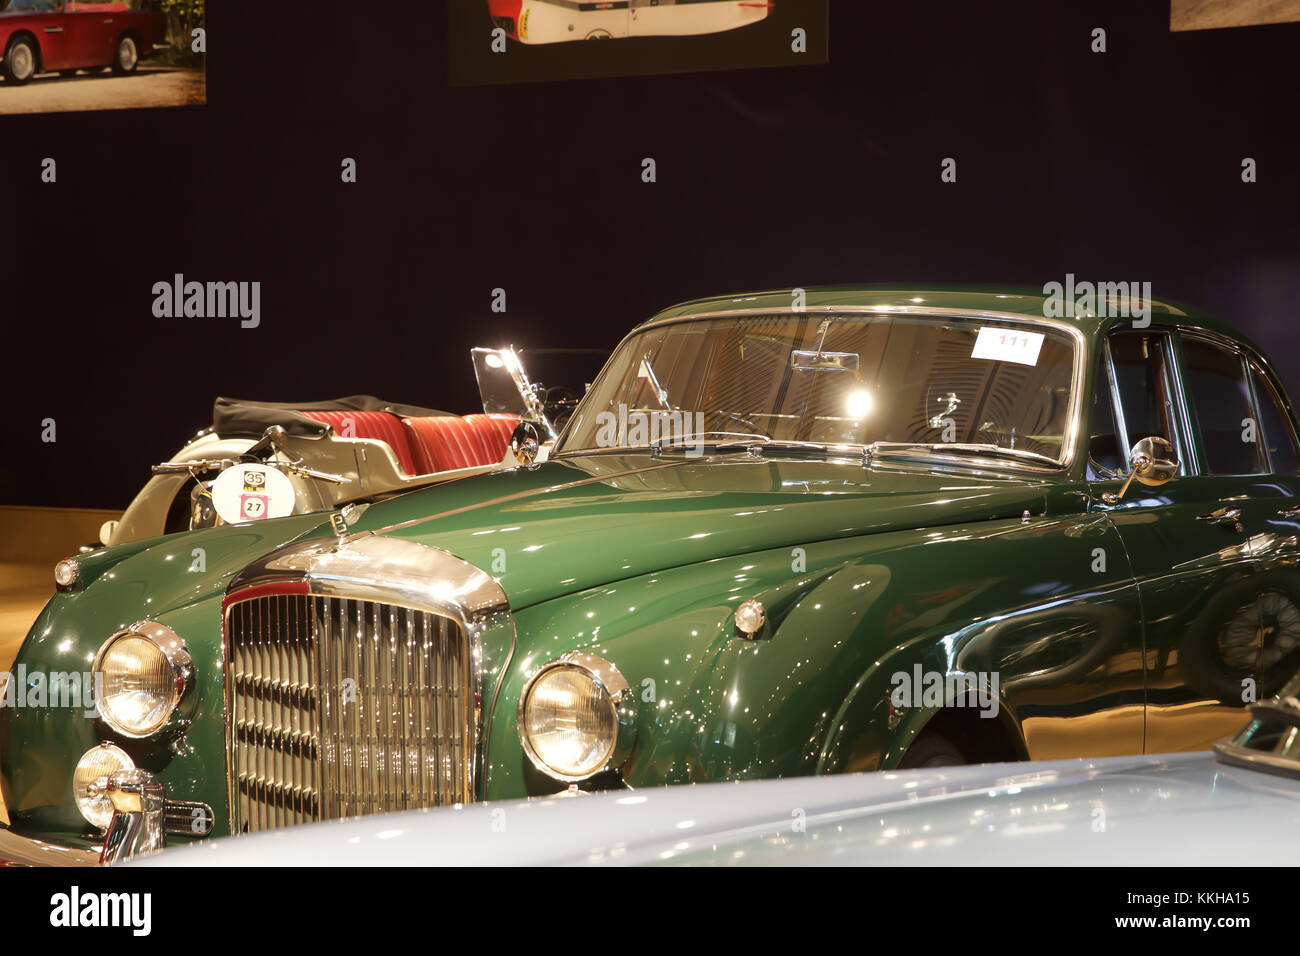 London, UK,1st December 2017, Top Celebrity cars on display at Bonhams in London. Cars include: The ex-Sir Paul McCartney 1964 Aston Martin DB5 Sports Saloon (£1,250,000 - £1,500,000) and the ex-Ringo Starr 1966 Austin Mini Cooper S (£90,000-120,000). There were also two Bentleys previously owned by Sir Elton John: 1959 Bentley S1 Continental Sport Saloon (£400,000-500,000) and 1960 Bentley S2 Continental Flying Spur Sports Saloon (£160,000-190,000). Credit: Keith Larby/Alamy Live News Stock Photo